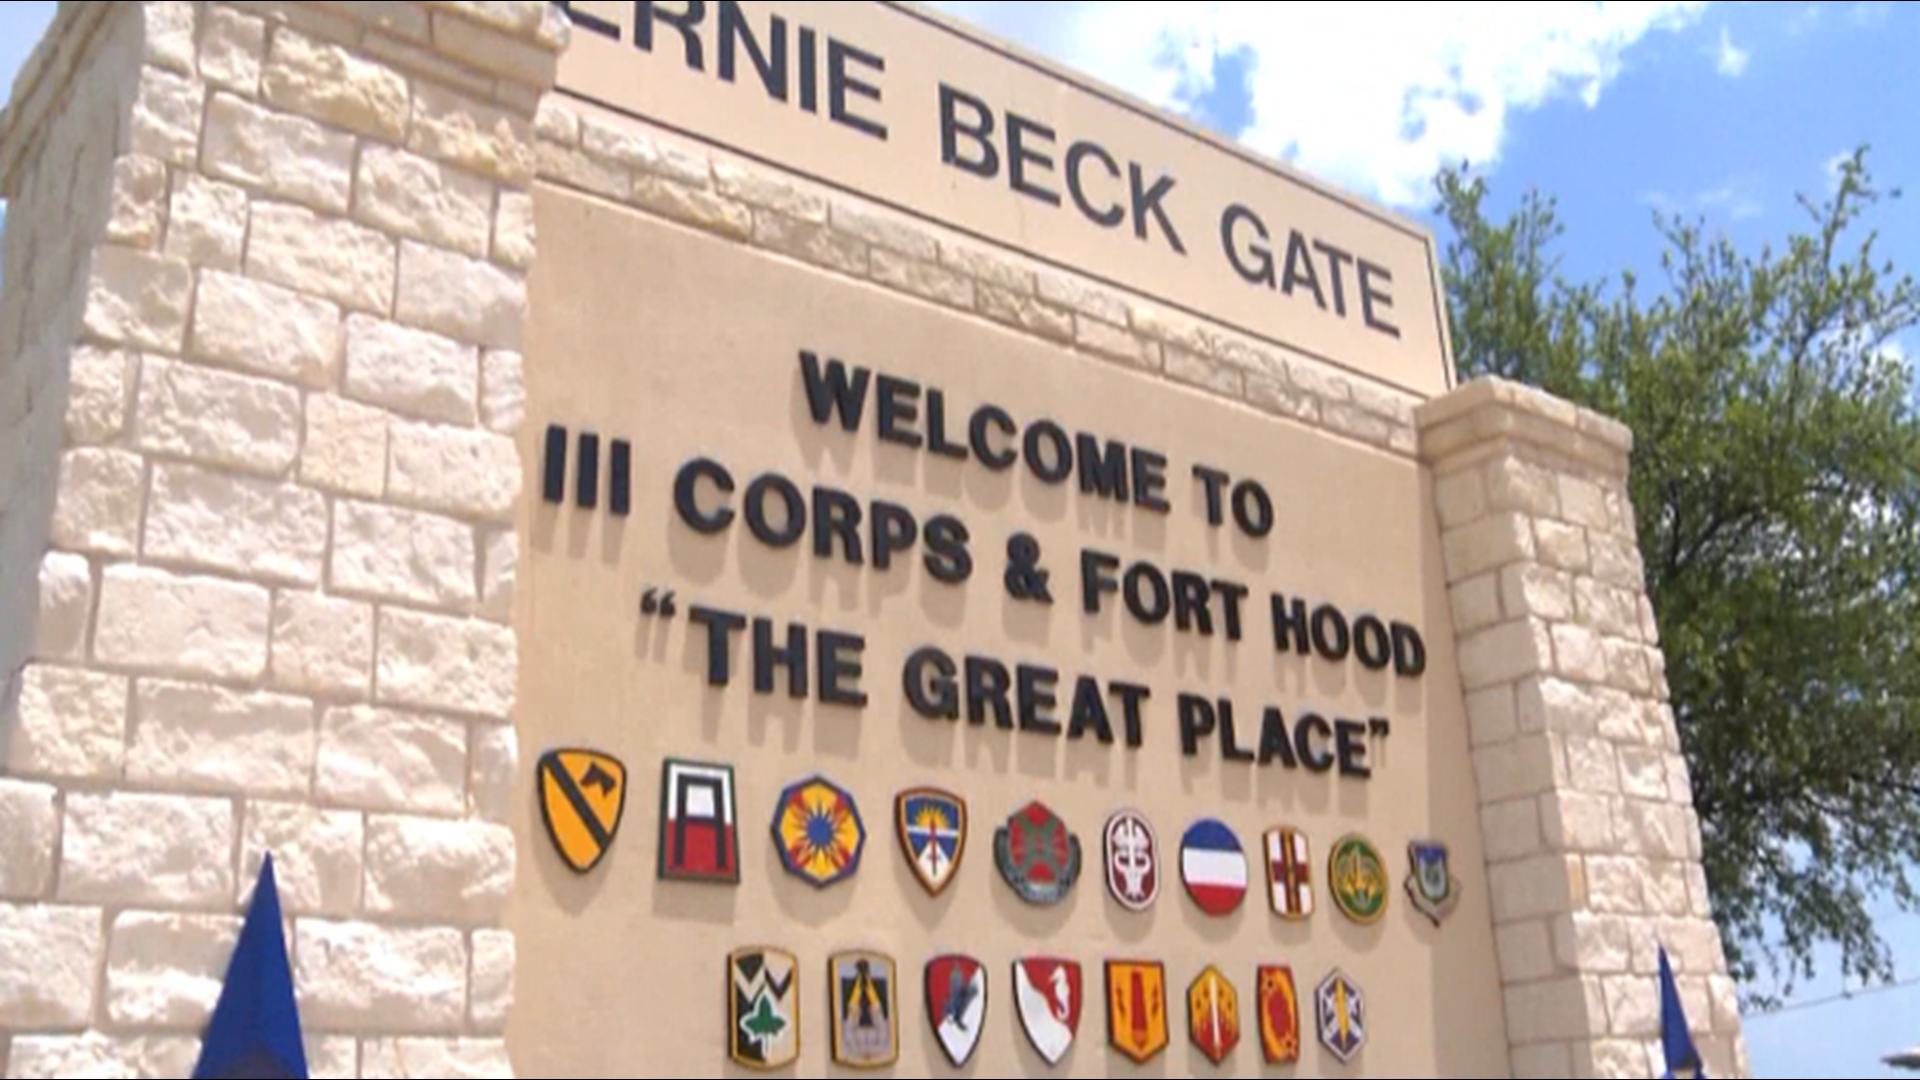 This comes after a review found a litany of flaws in the way Fort Hood investigates felony crimes last year.